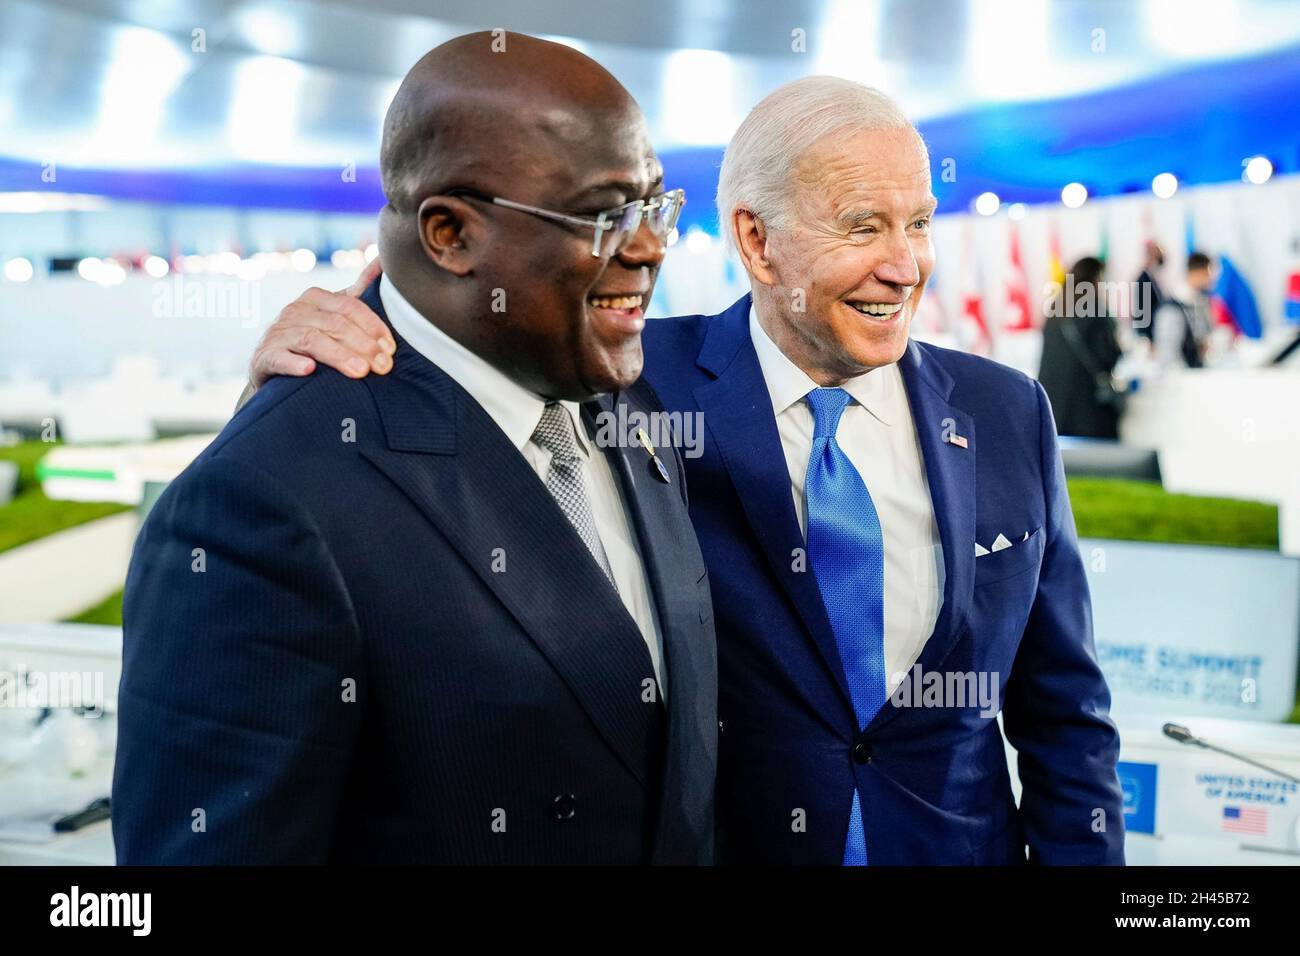 Rome, Italy. 31st Oct, 2021. U.S President Joe Biden poses with Democratic Republic of the Congo President Felix Tshisekedi, during the second day of the G20 Summit in the La Nuvola Conference Center, October 31, 2021 in Rome, Italy. Credit: Adam Schultz/White House Photo/Alamy Live News Stock Photo